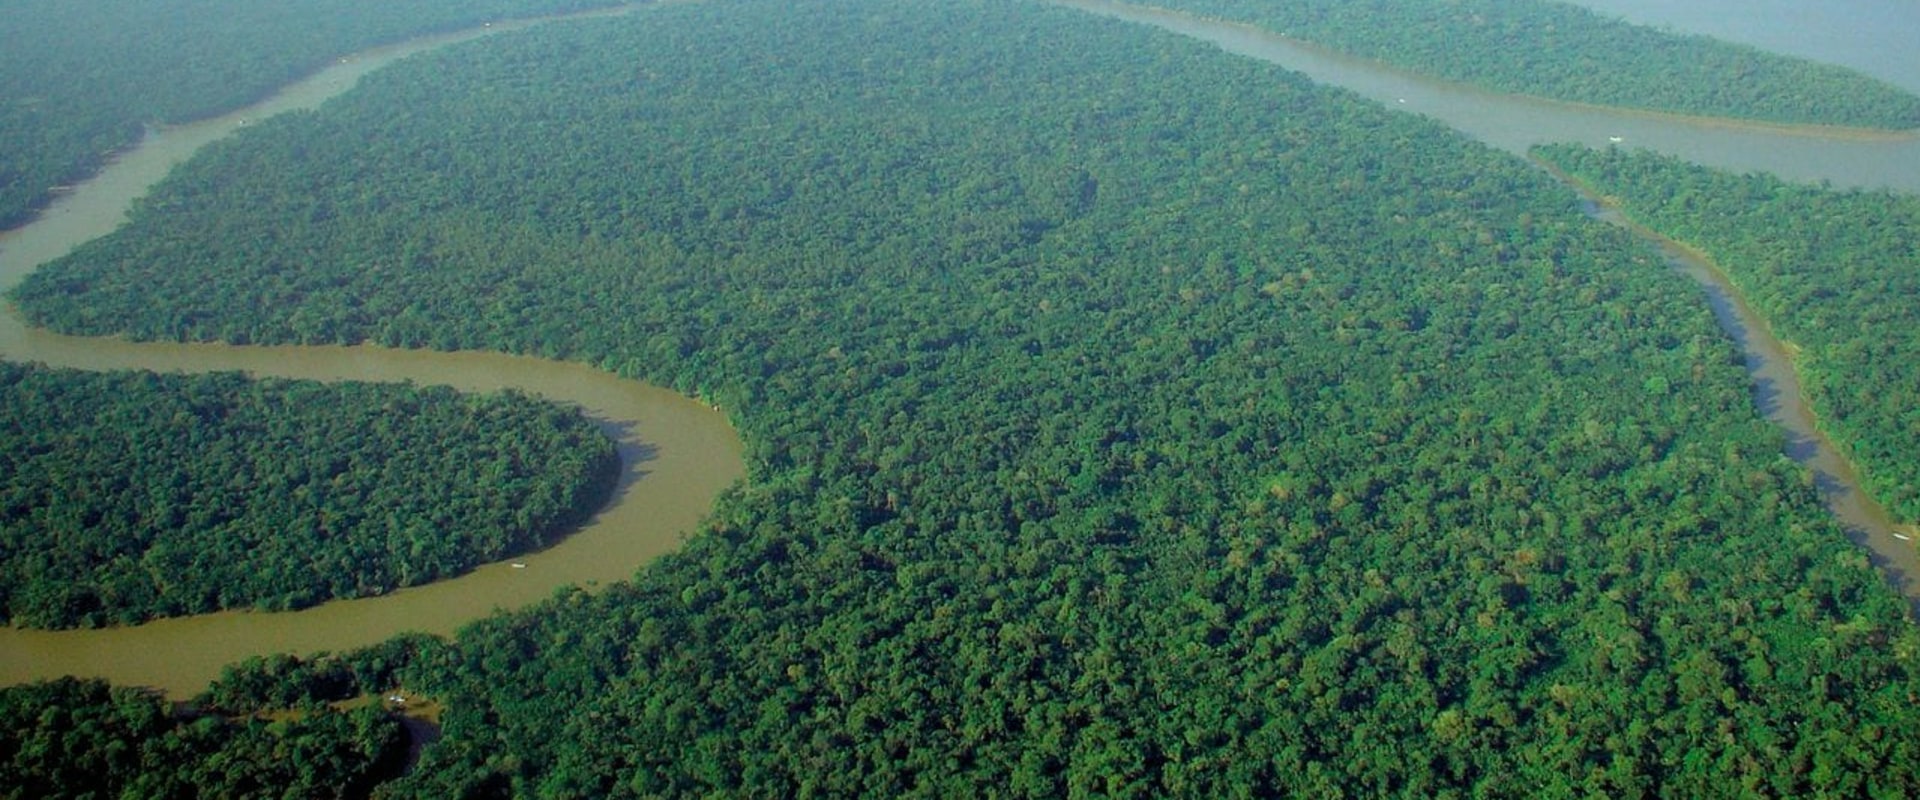 What is the biggest forest in the world?